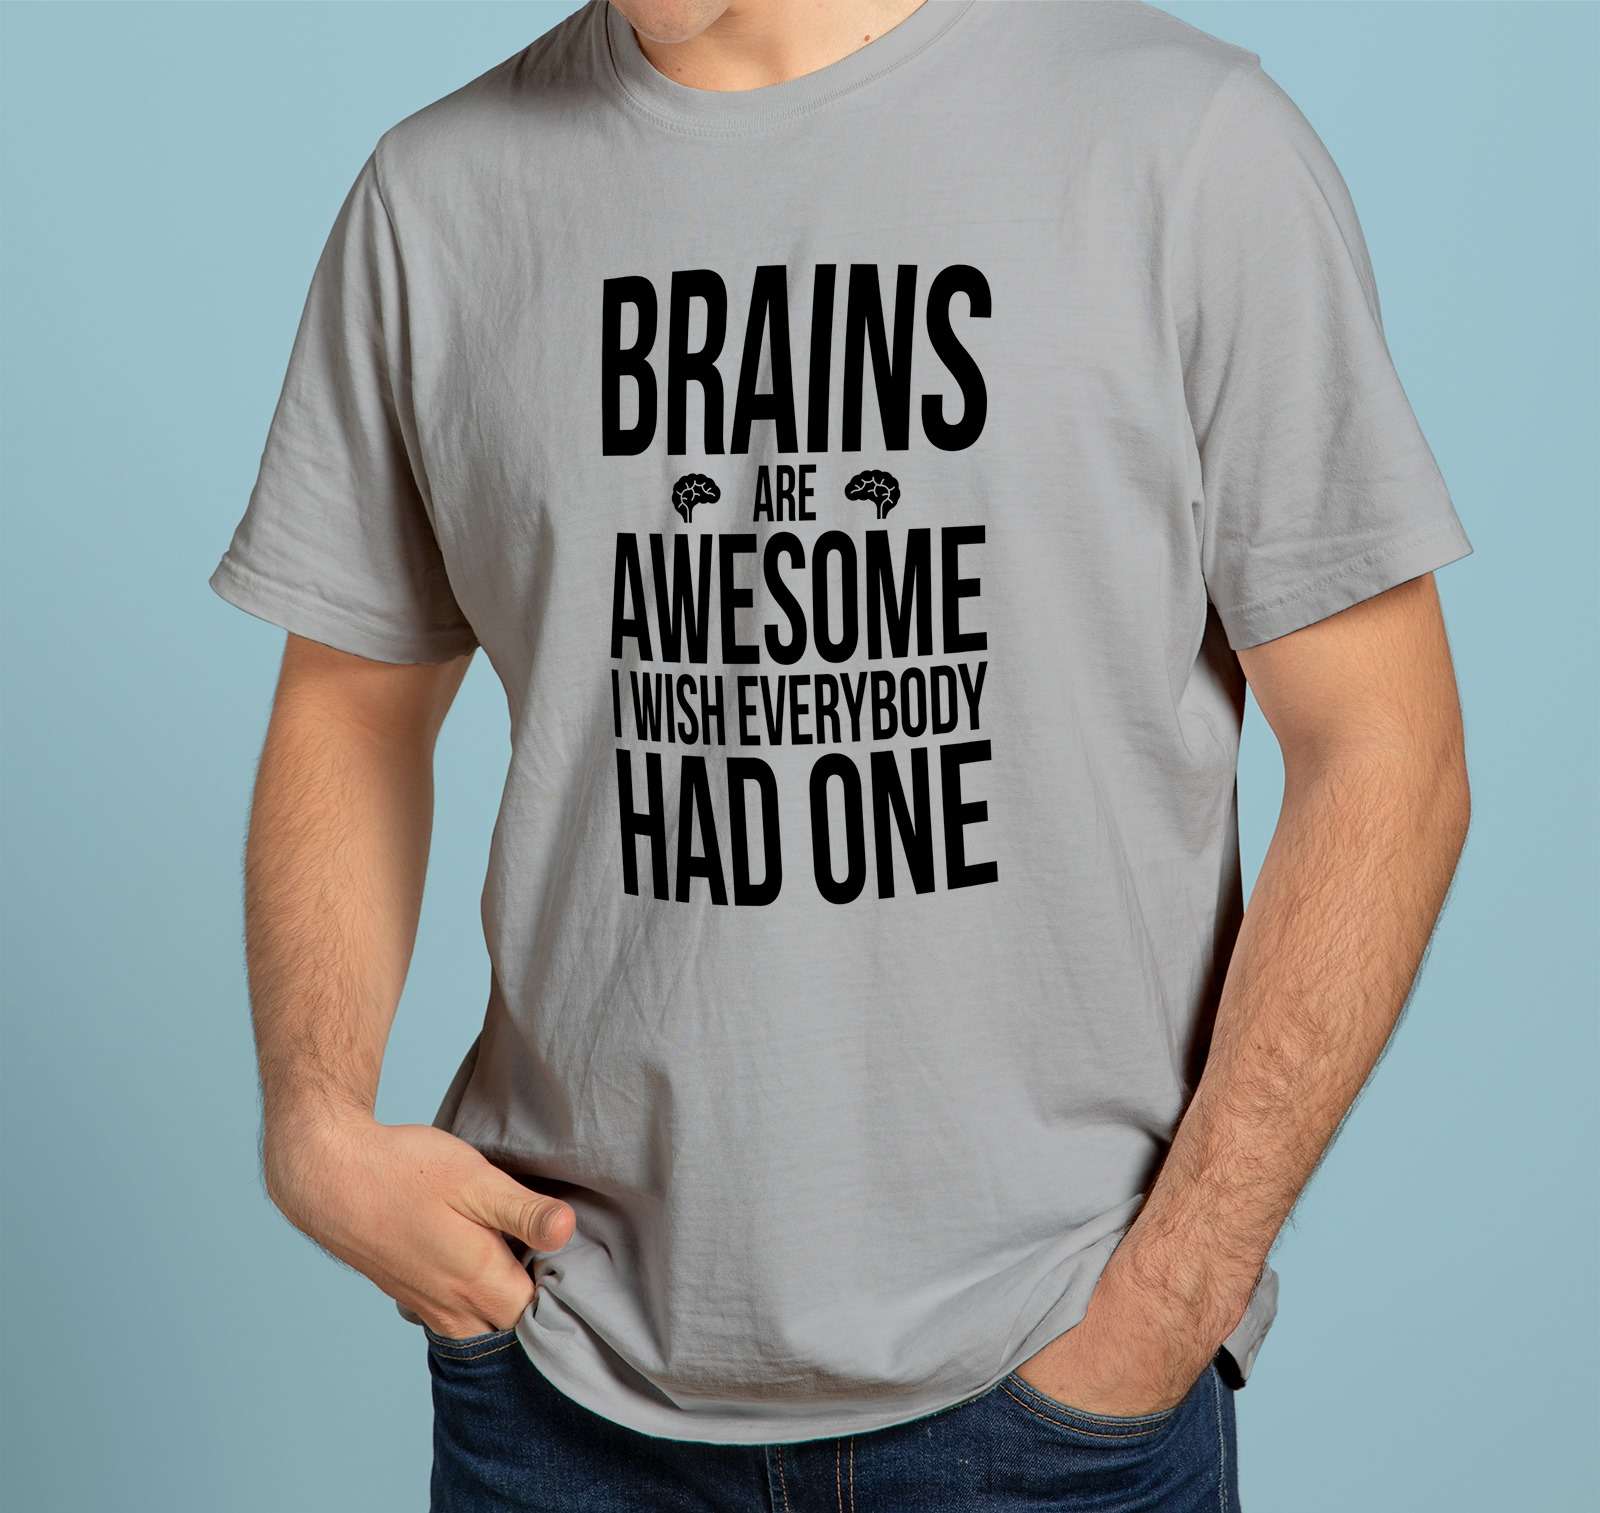 Brains are awesome I wish everybody had one - Stupid people, people need brain